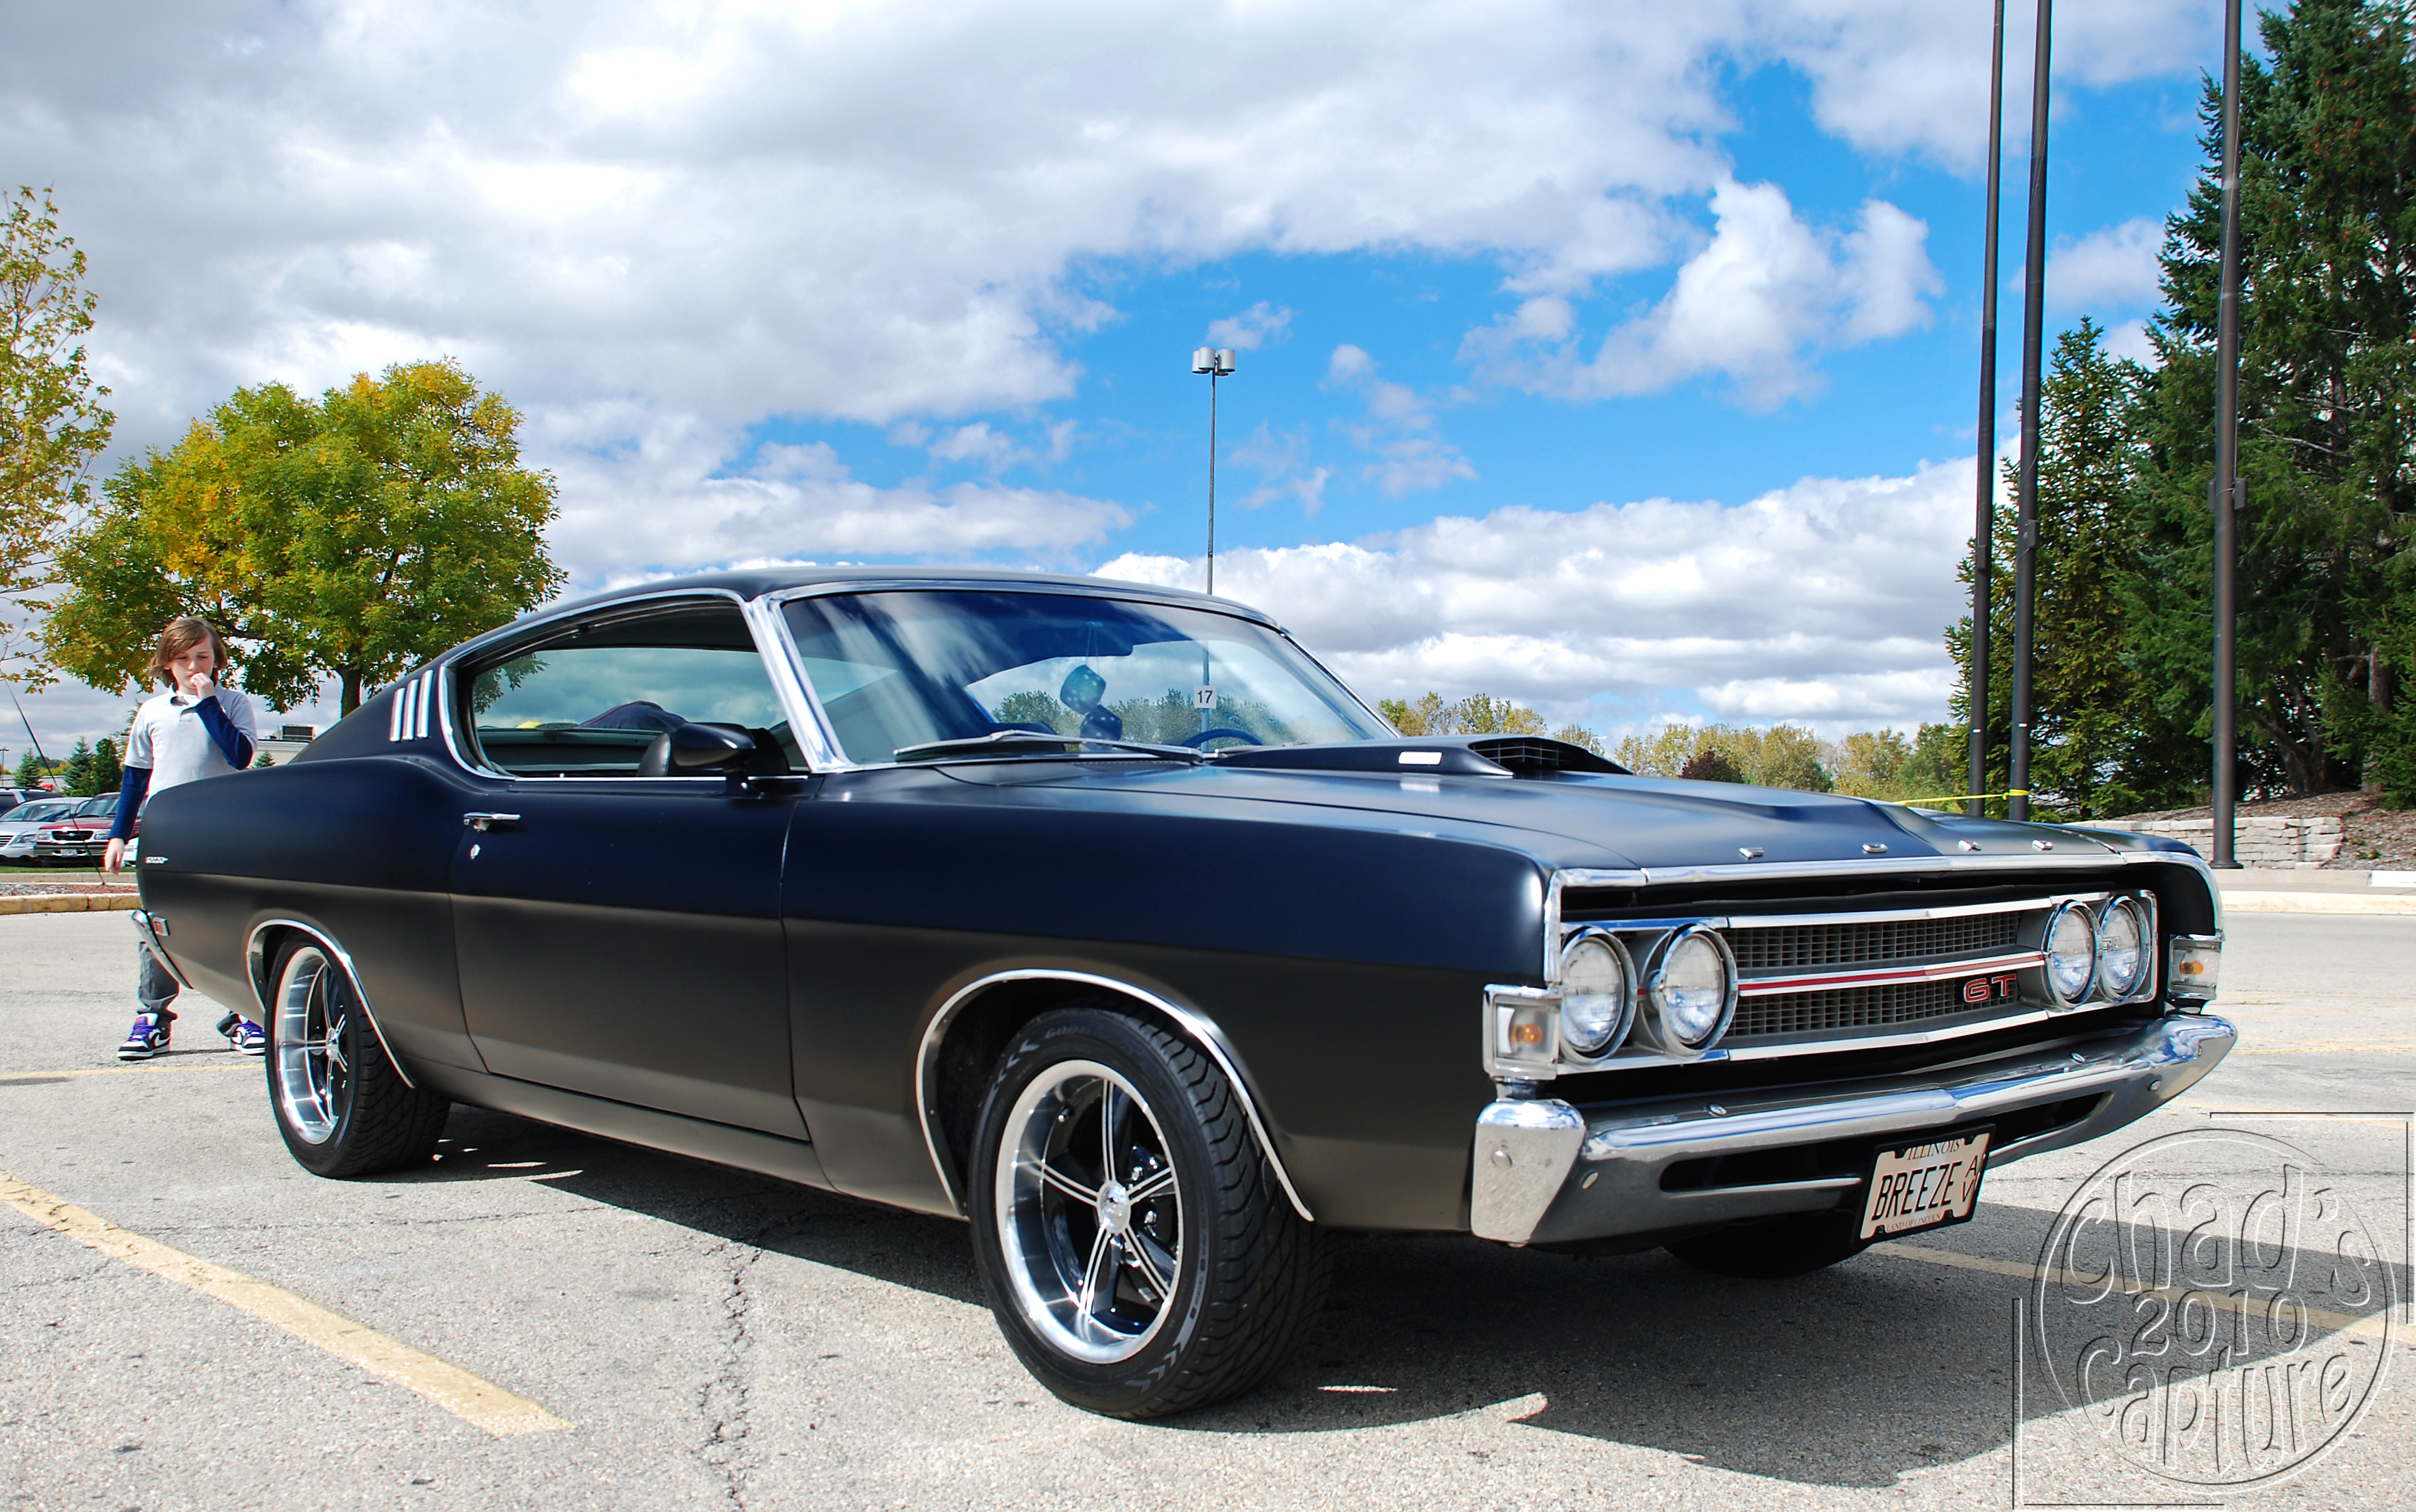 1969 Ford Torino Images | Pictures and Videos